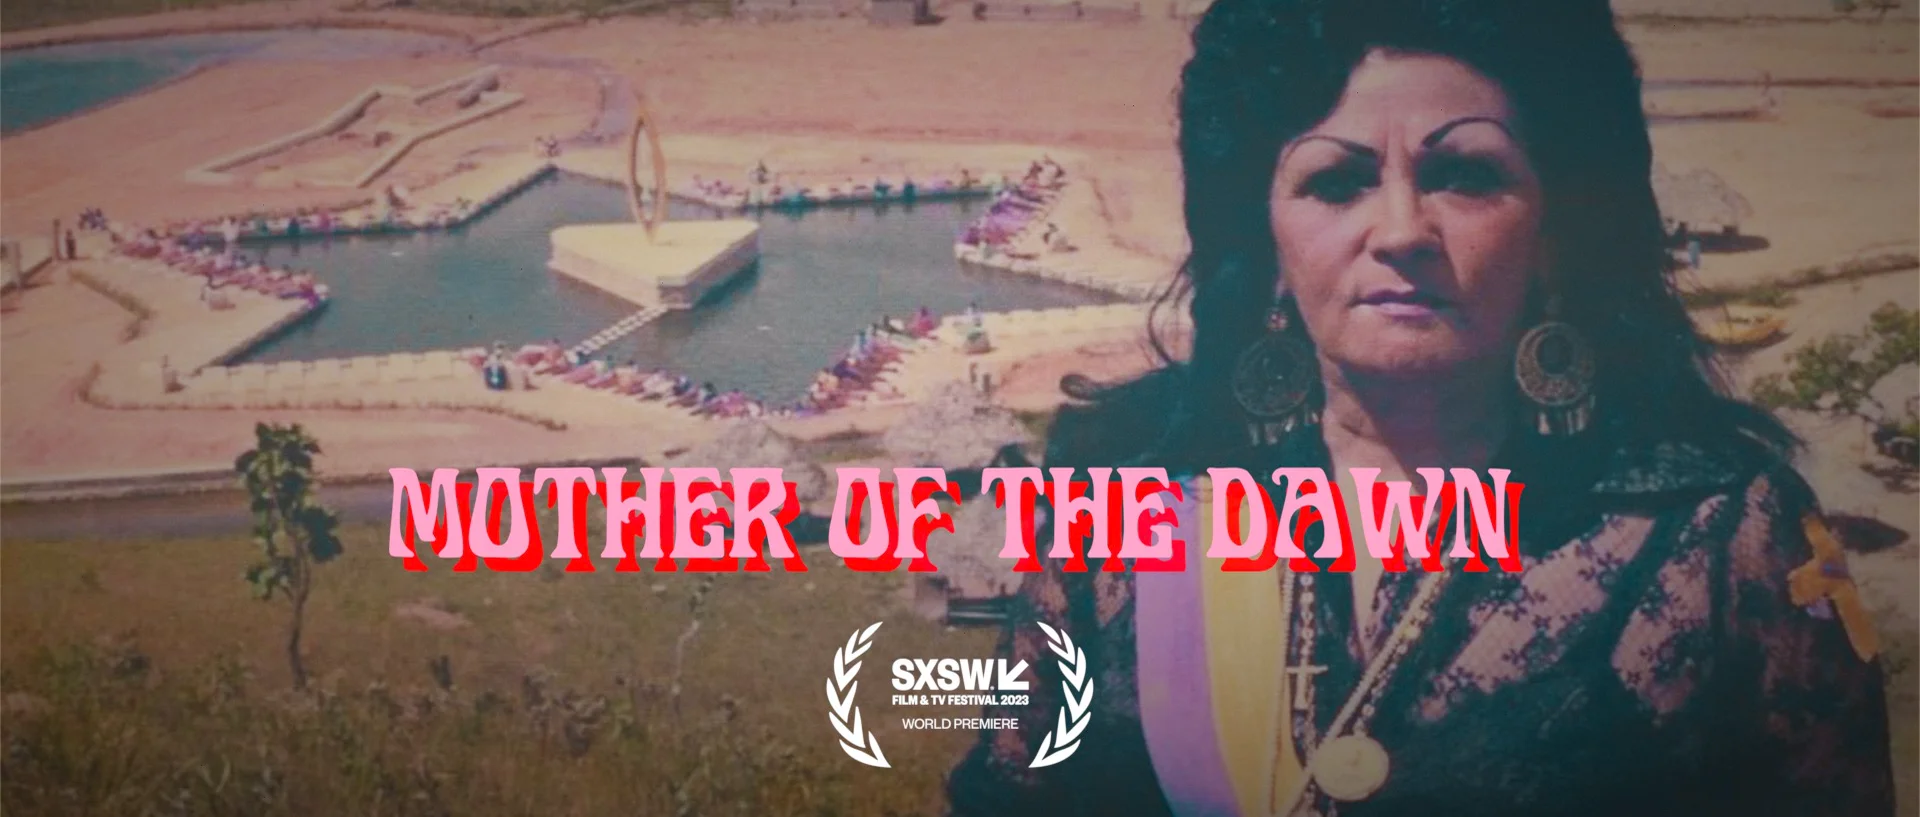 Mother of the Dawn on Vimeo